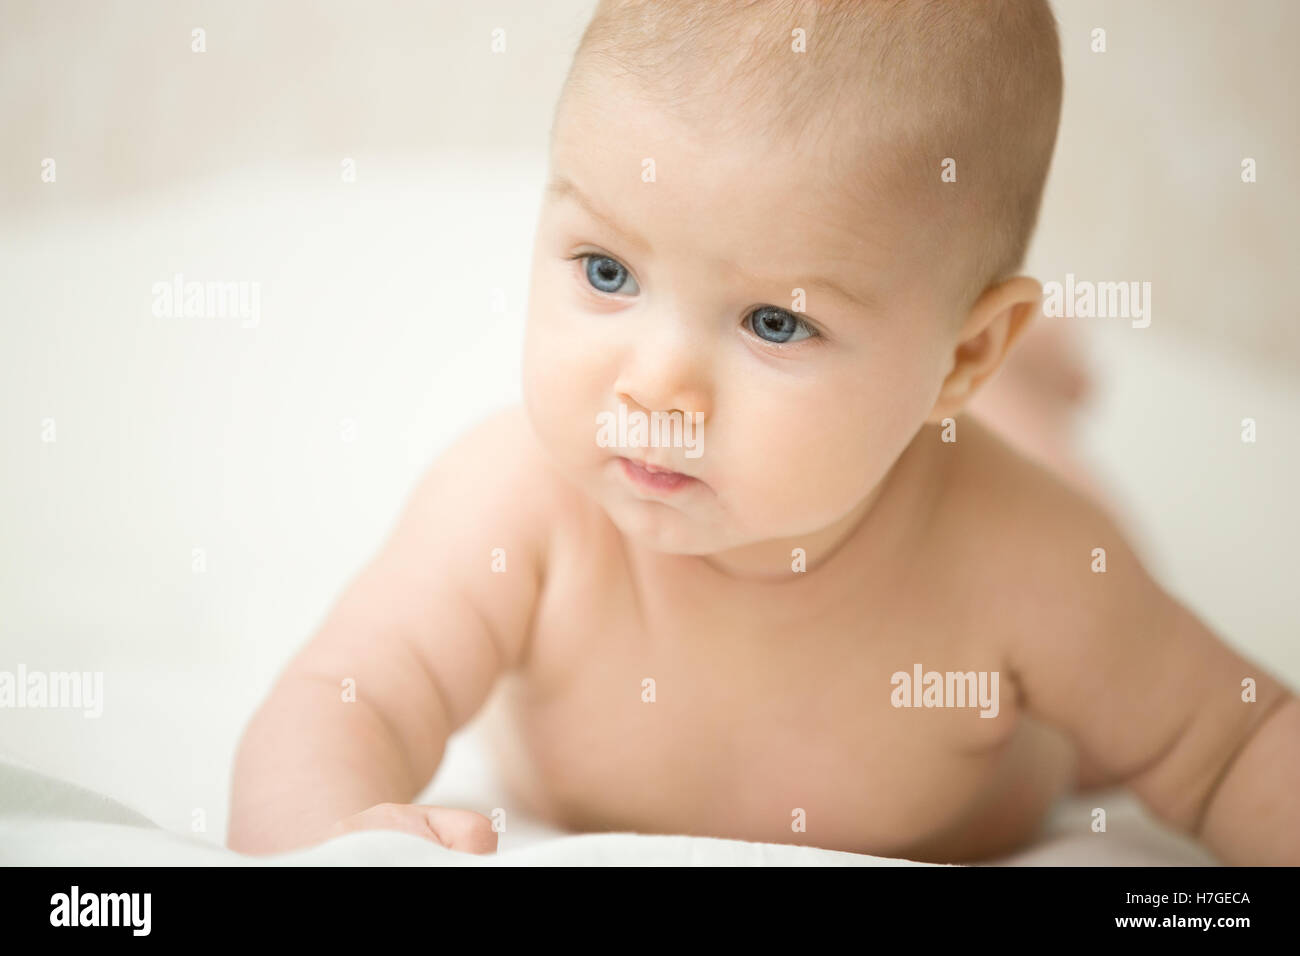 Portrait of a cute child turnig his head, looking serious Stock Photo